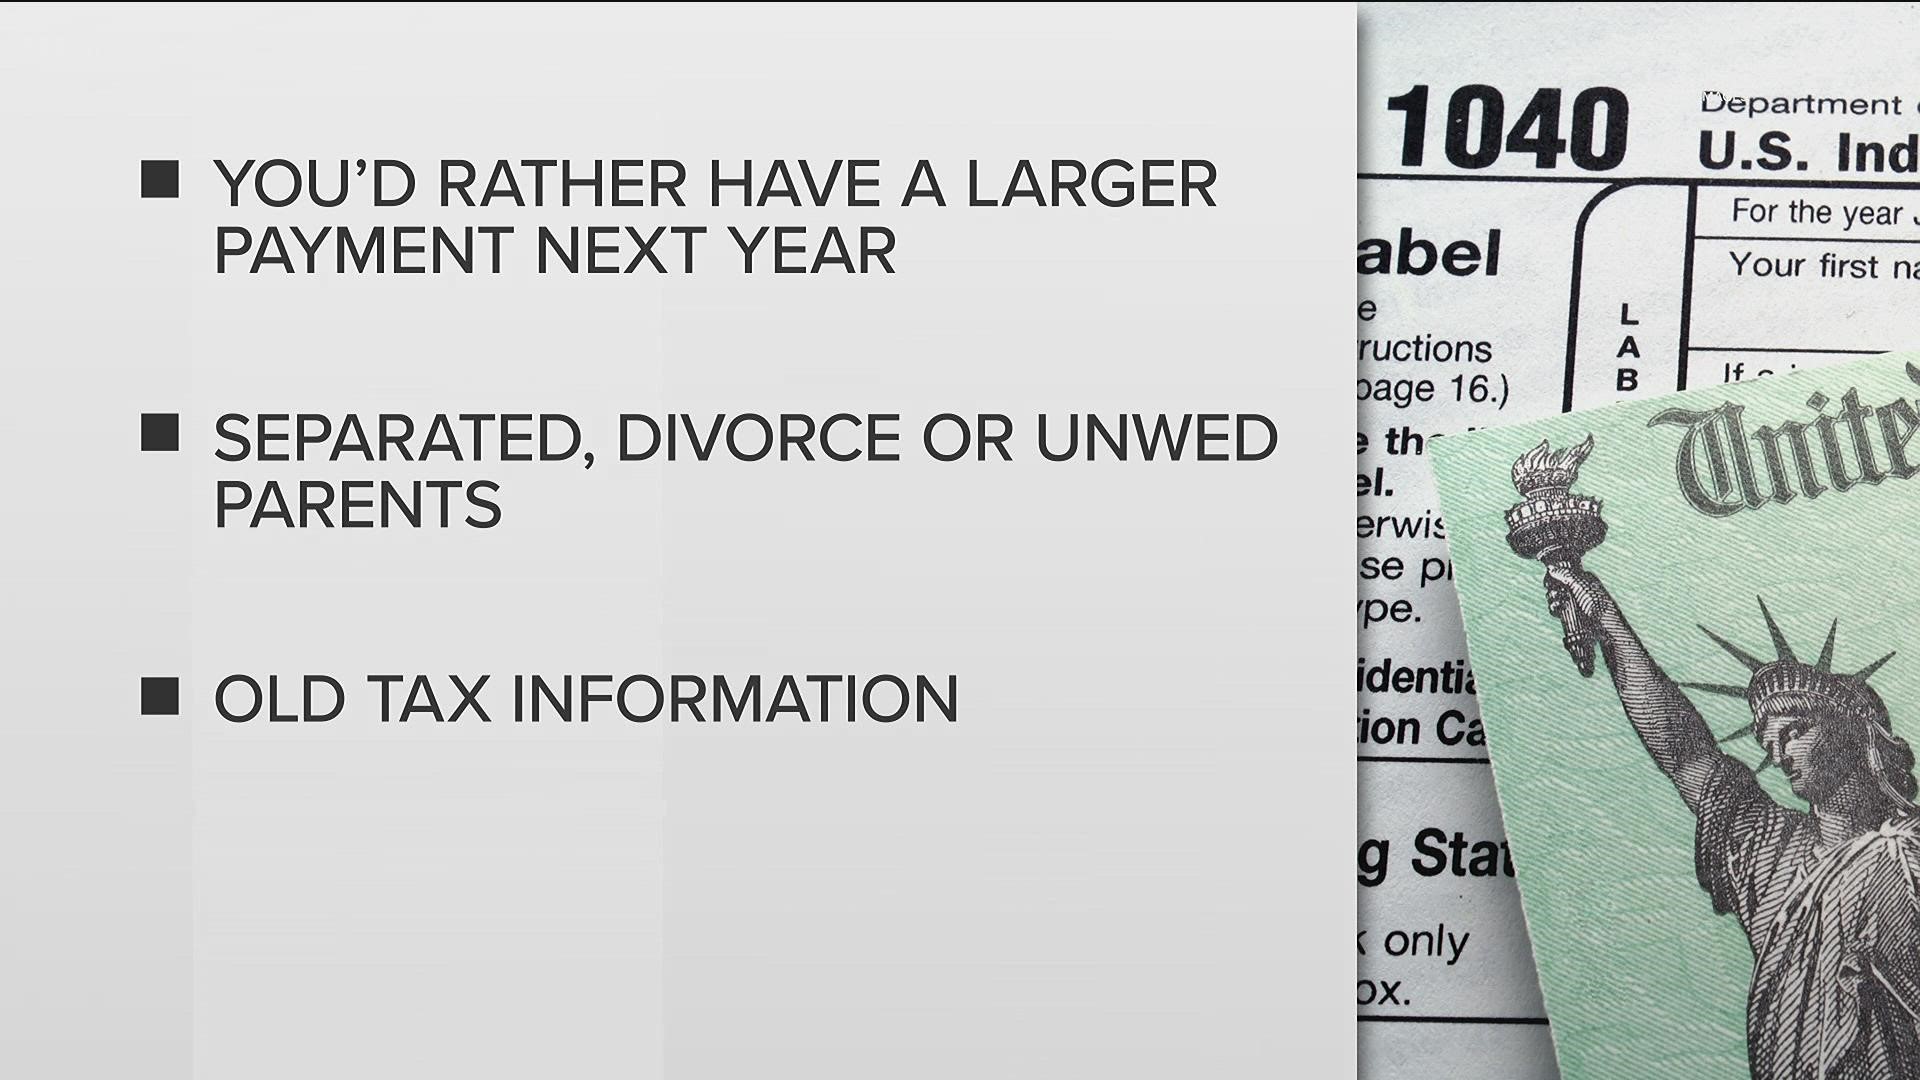 People who got divorced or want to delay their payment to one bulk tax credit may want to opt out.